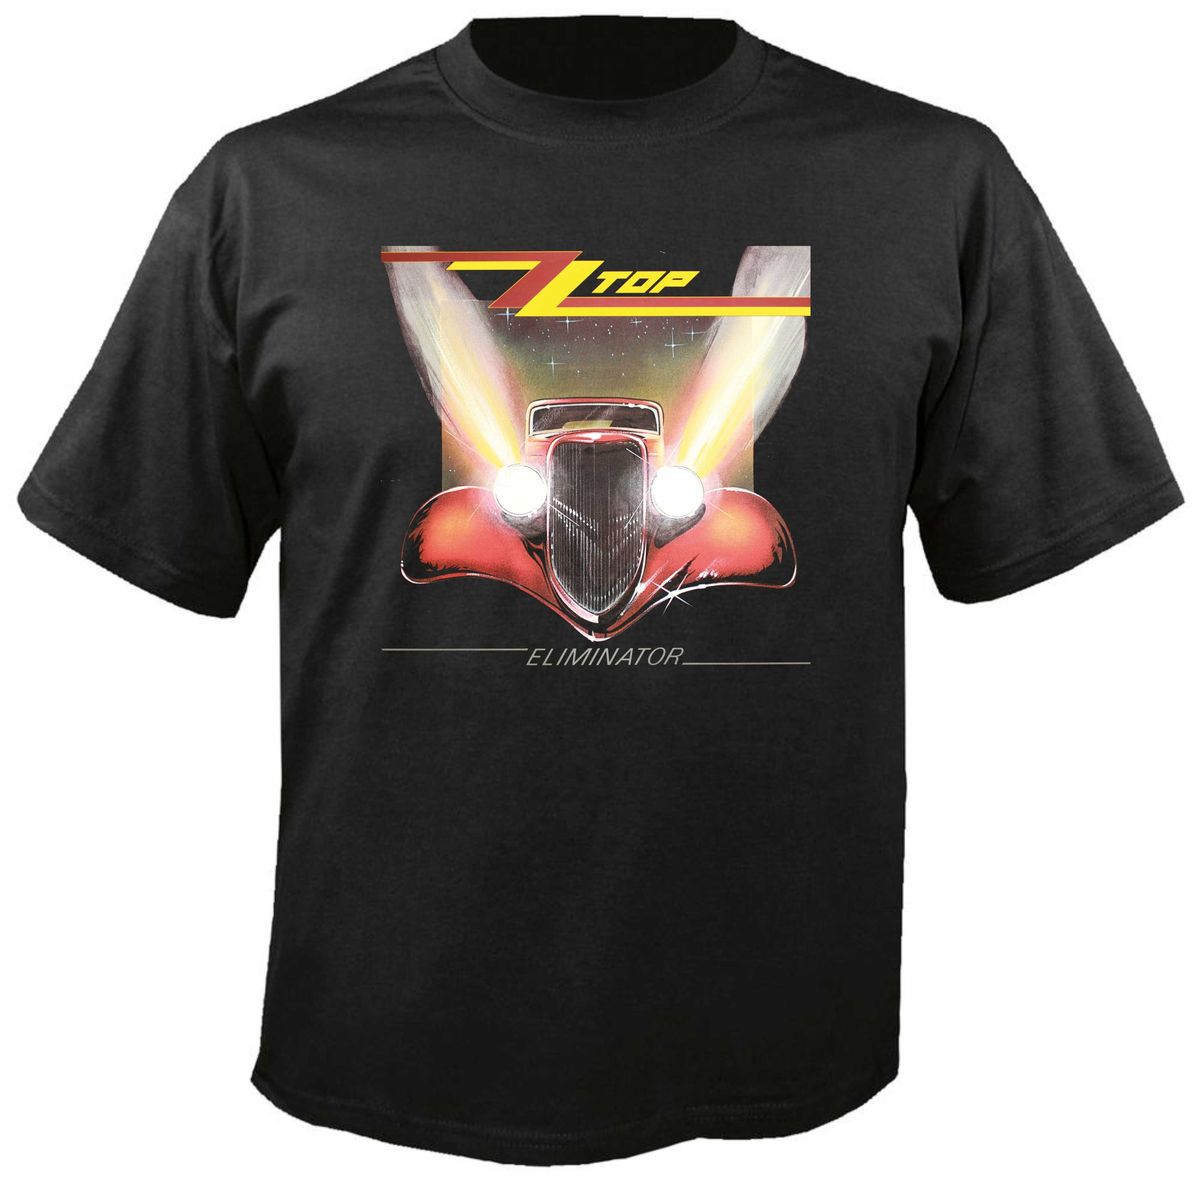 ZZ Top Eliminator Black T-Shirt – Metal & Rock T-shirts and Accessories